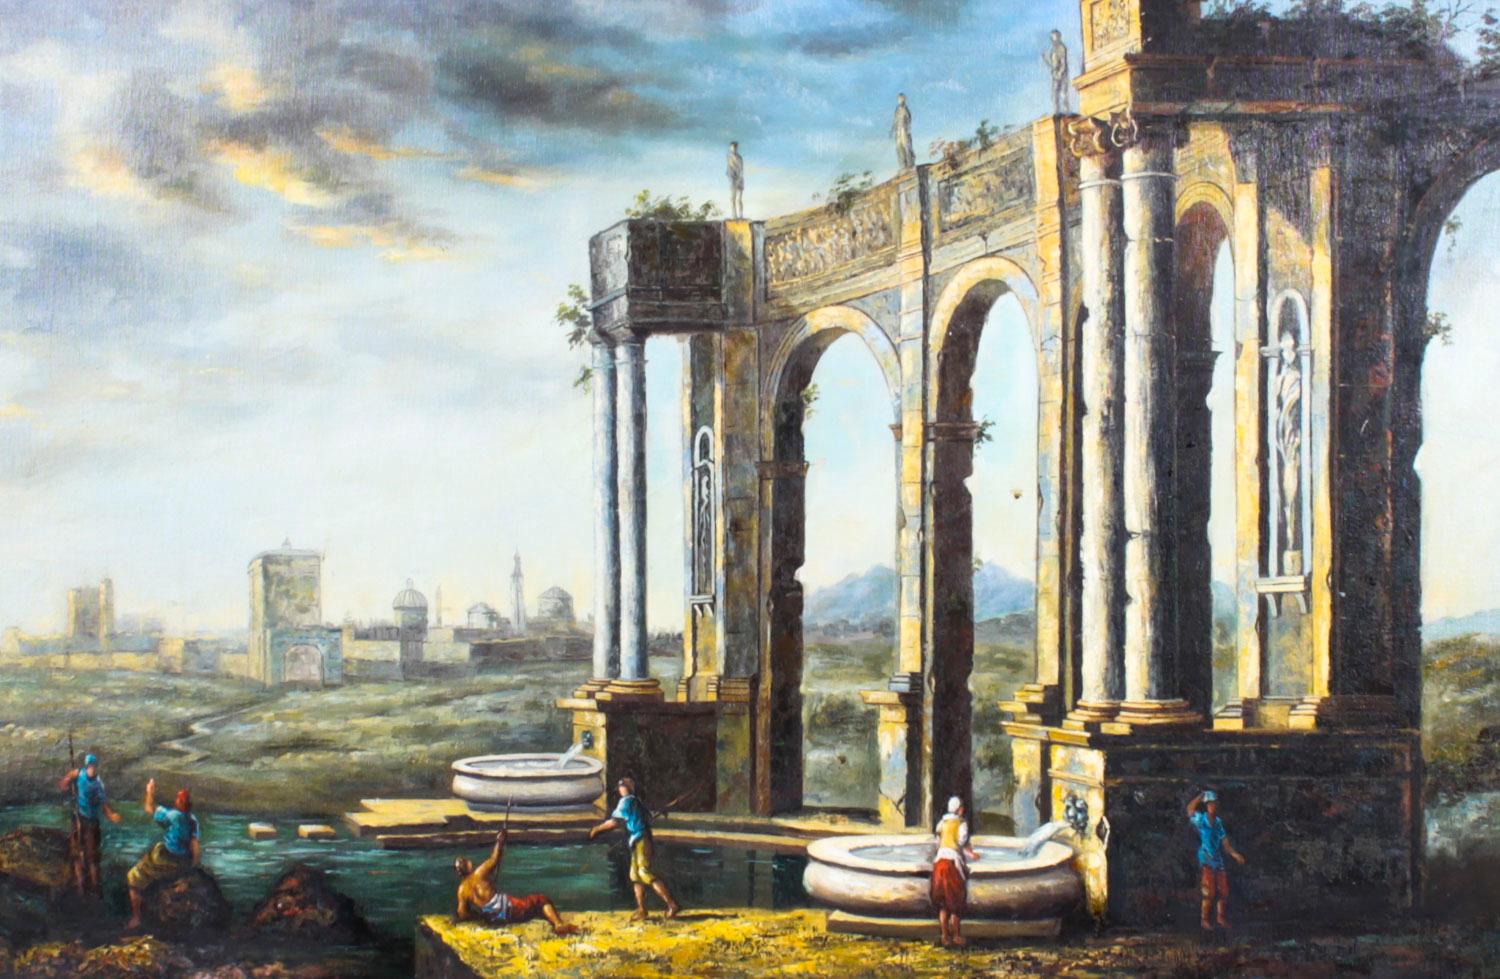 A beautiful vintage oil on canvas painting of the view of Roman Temple Ruins, mid 20th century in date.

The painting features a beautiful view of the ruins with local peasants in the foreground and the perspective of a distant city beyond.

Add